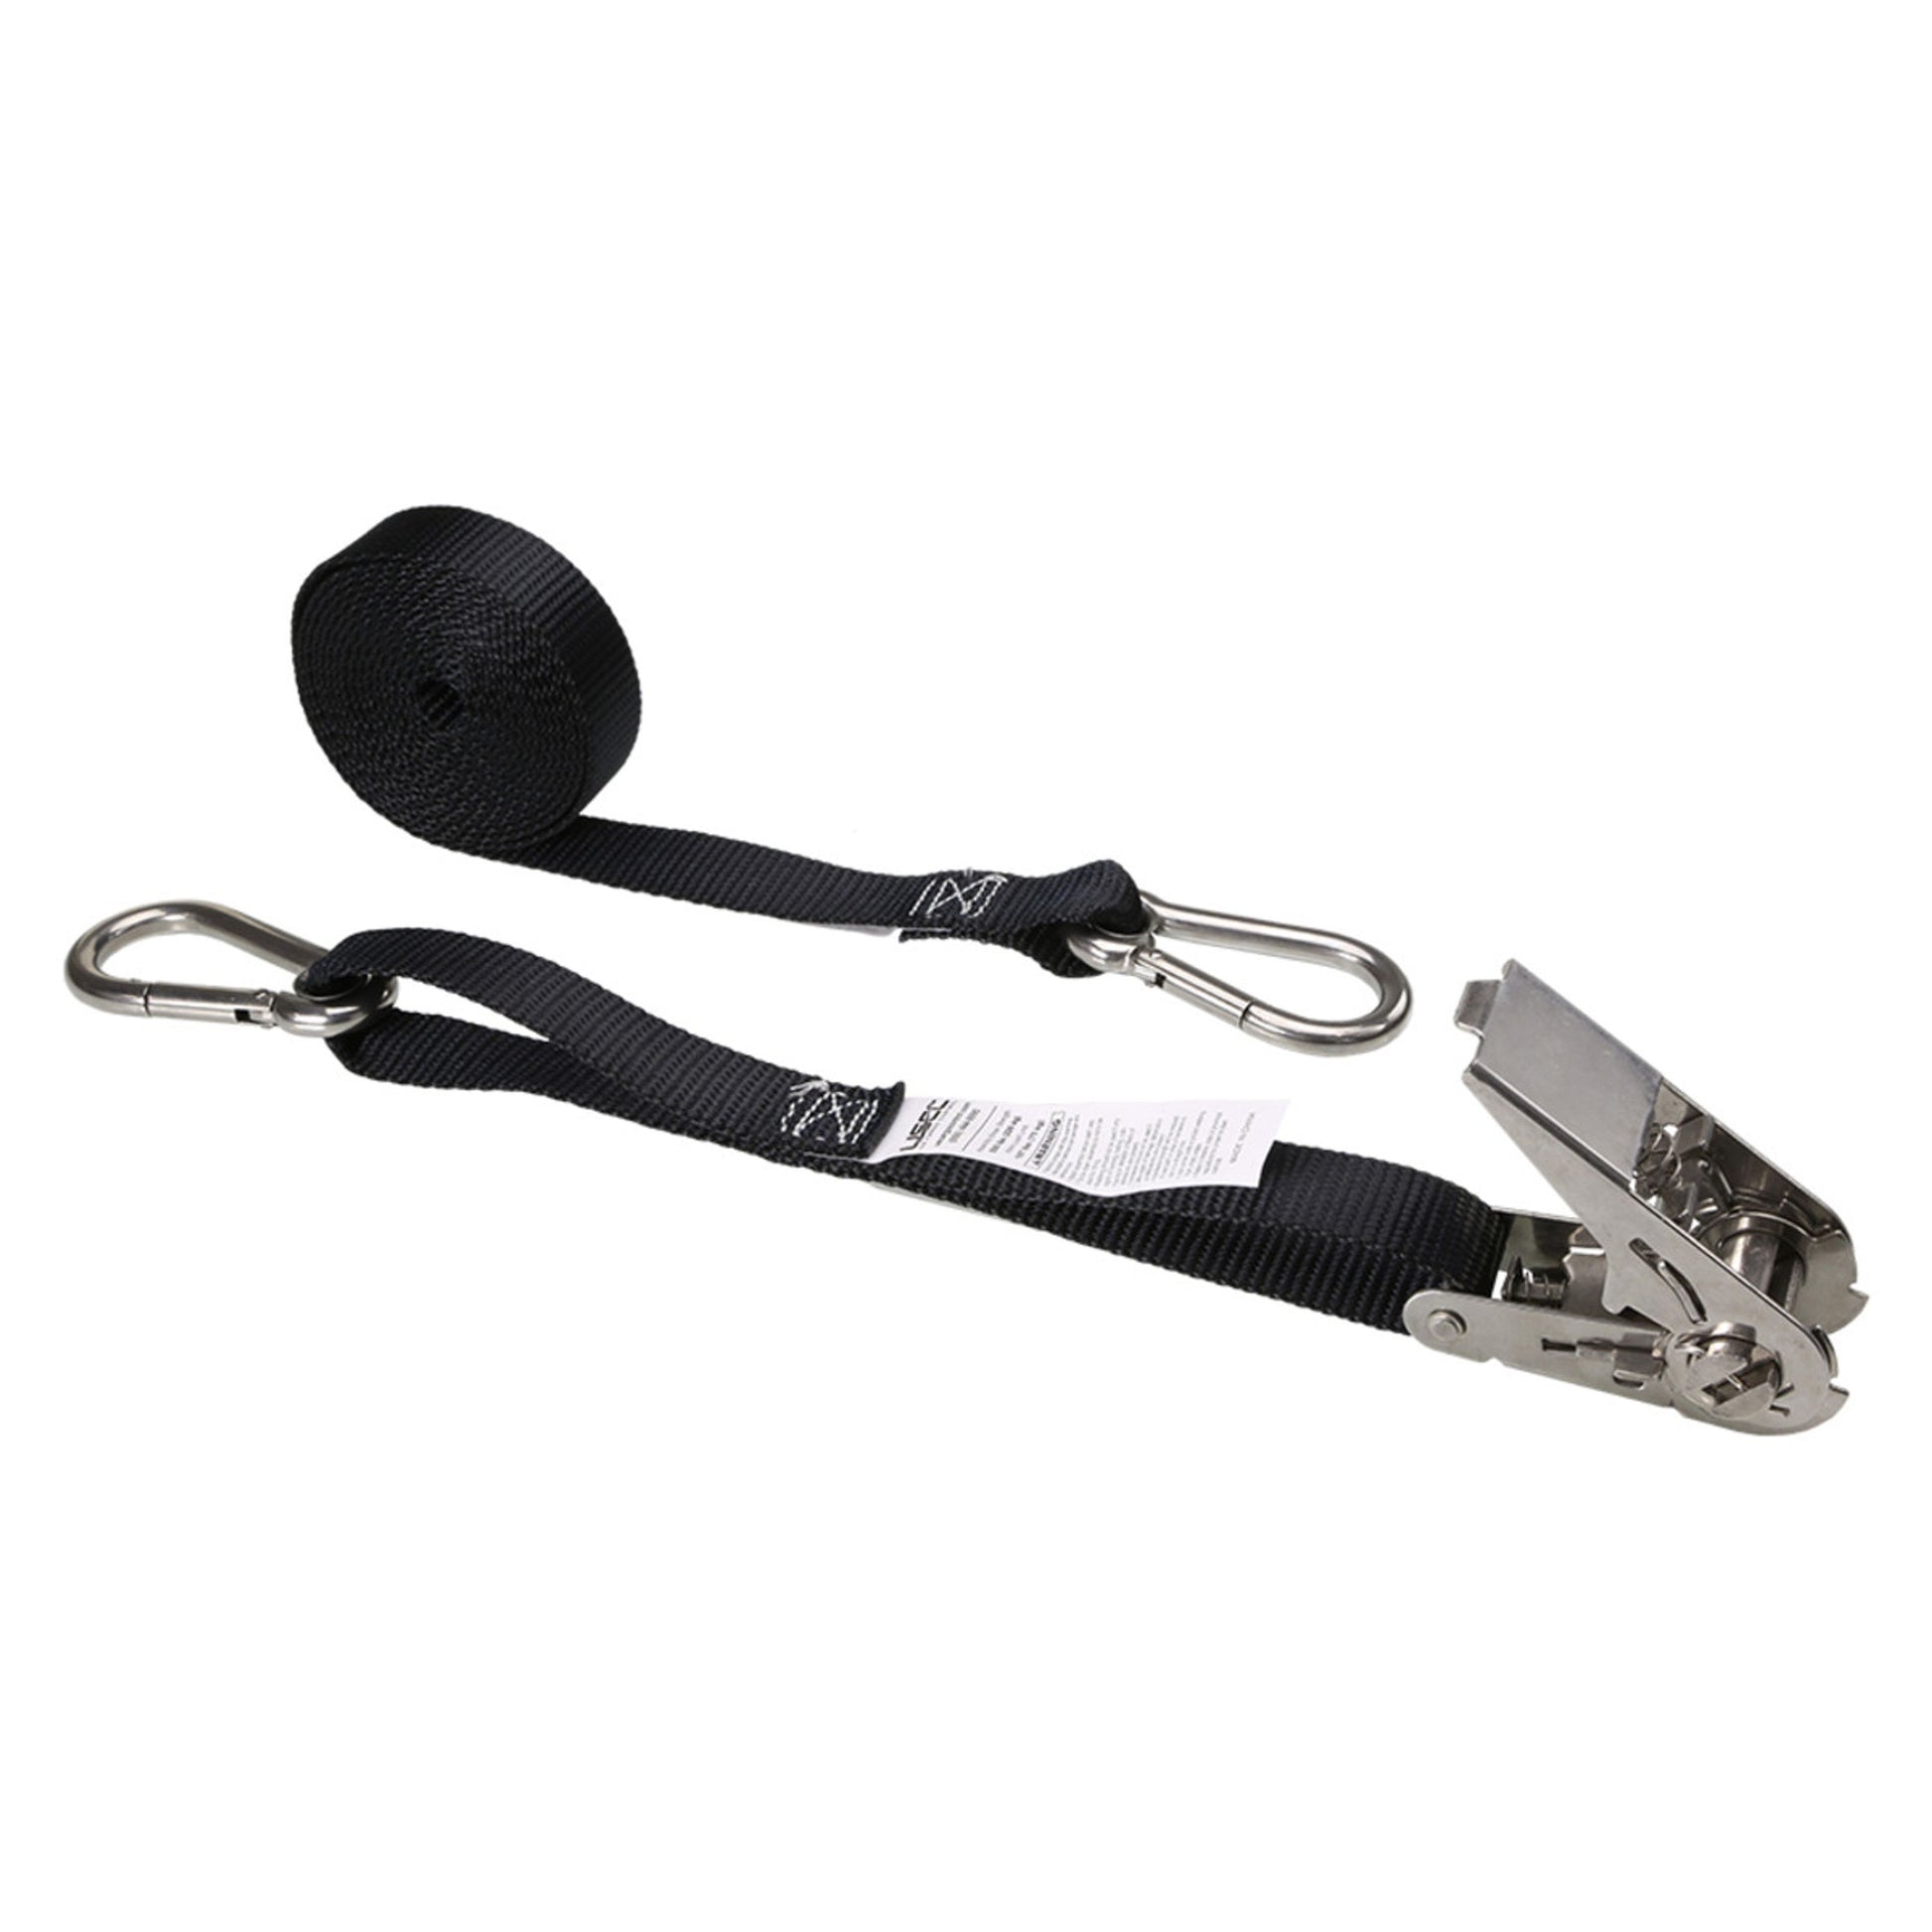 1" x 10' Black Stainless Steel Thumb Ratchet Strap w/ Carabiner Clips image 1 of 10